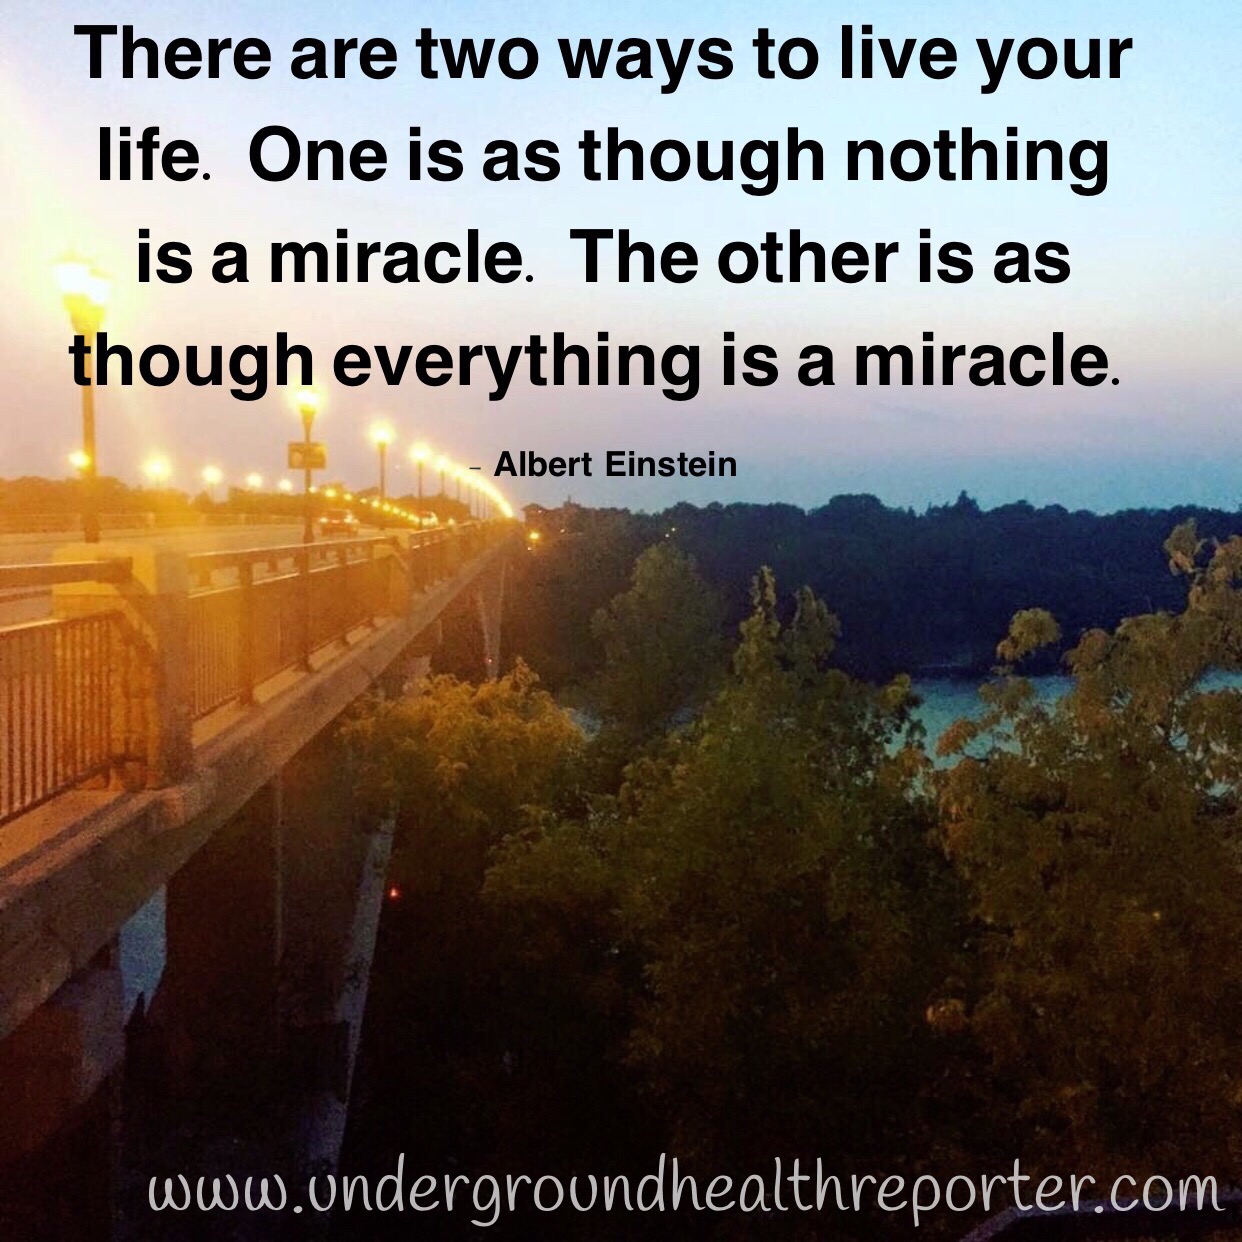 Albert Einstein said: "There are two ways to live your life. One is as though nothing is a miracle. The other is as though everything is a miracle"